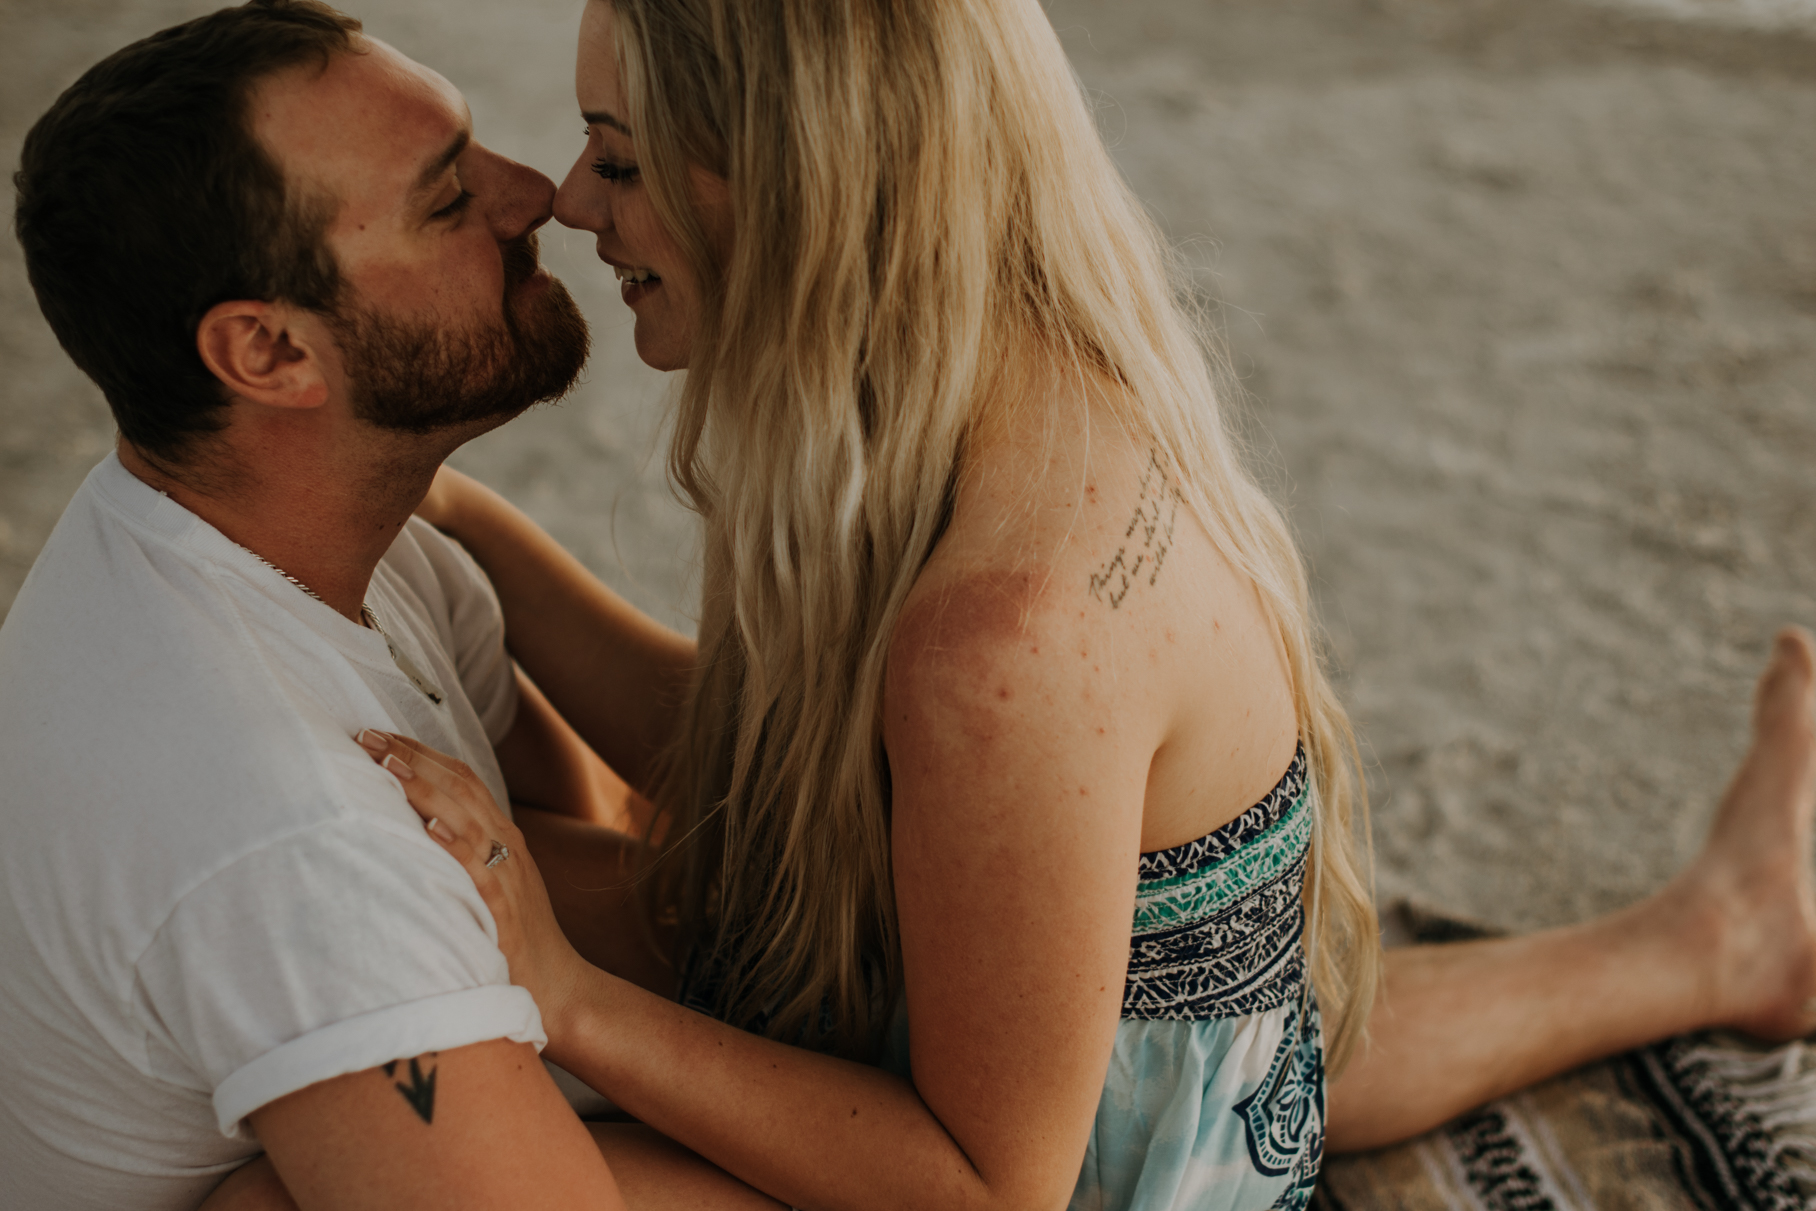 emily + brett | st pete beach engagement | freehearted film co | tampa wedding photography for freespirited lovers